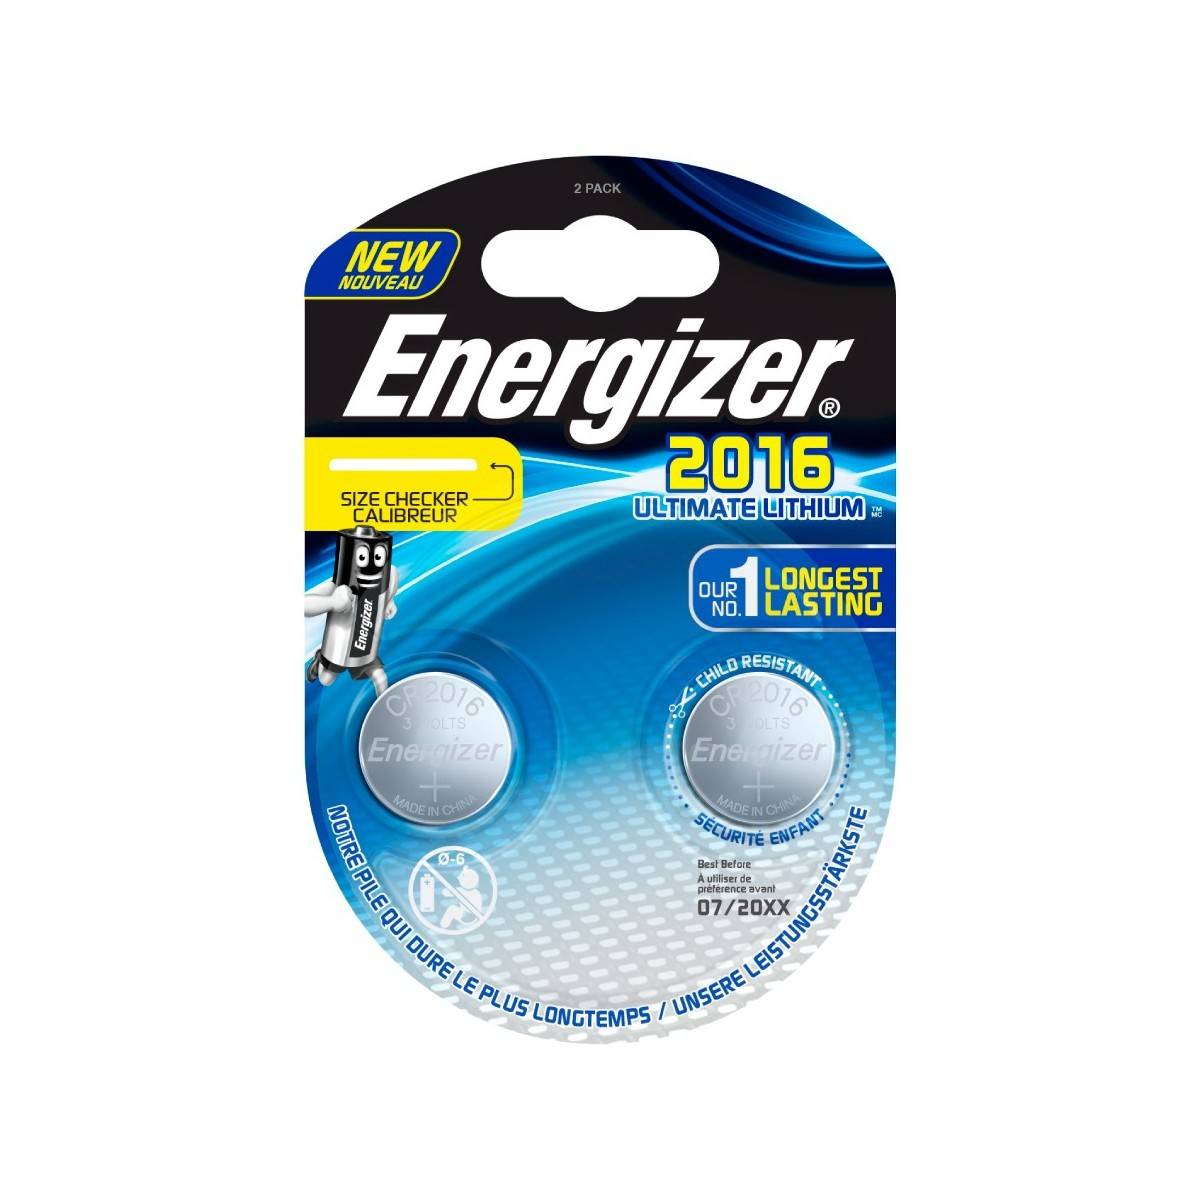 Energizer CR2016 Lithium Performance Batterie, Blisterpackung mit 1 Stk.